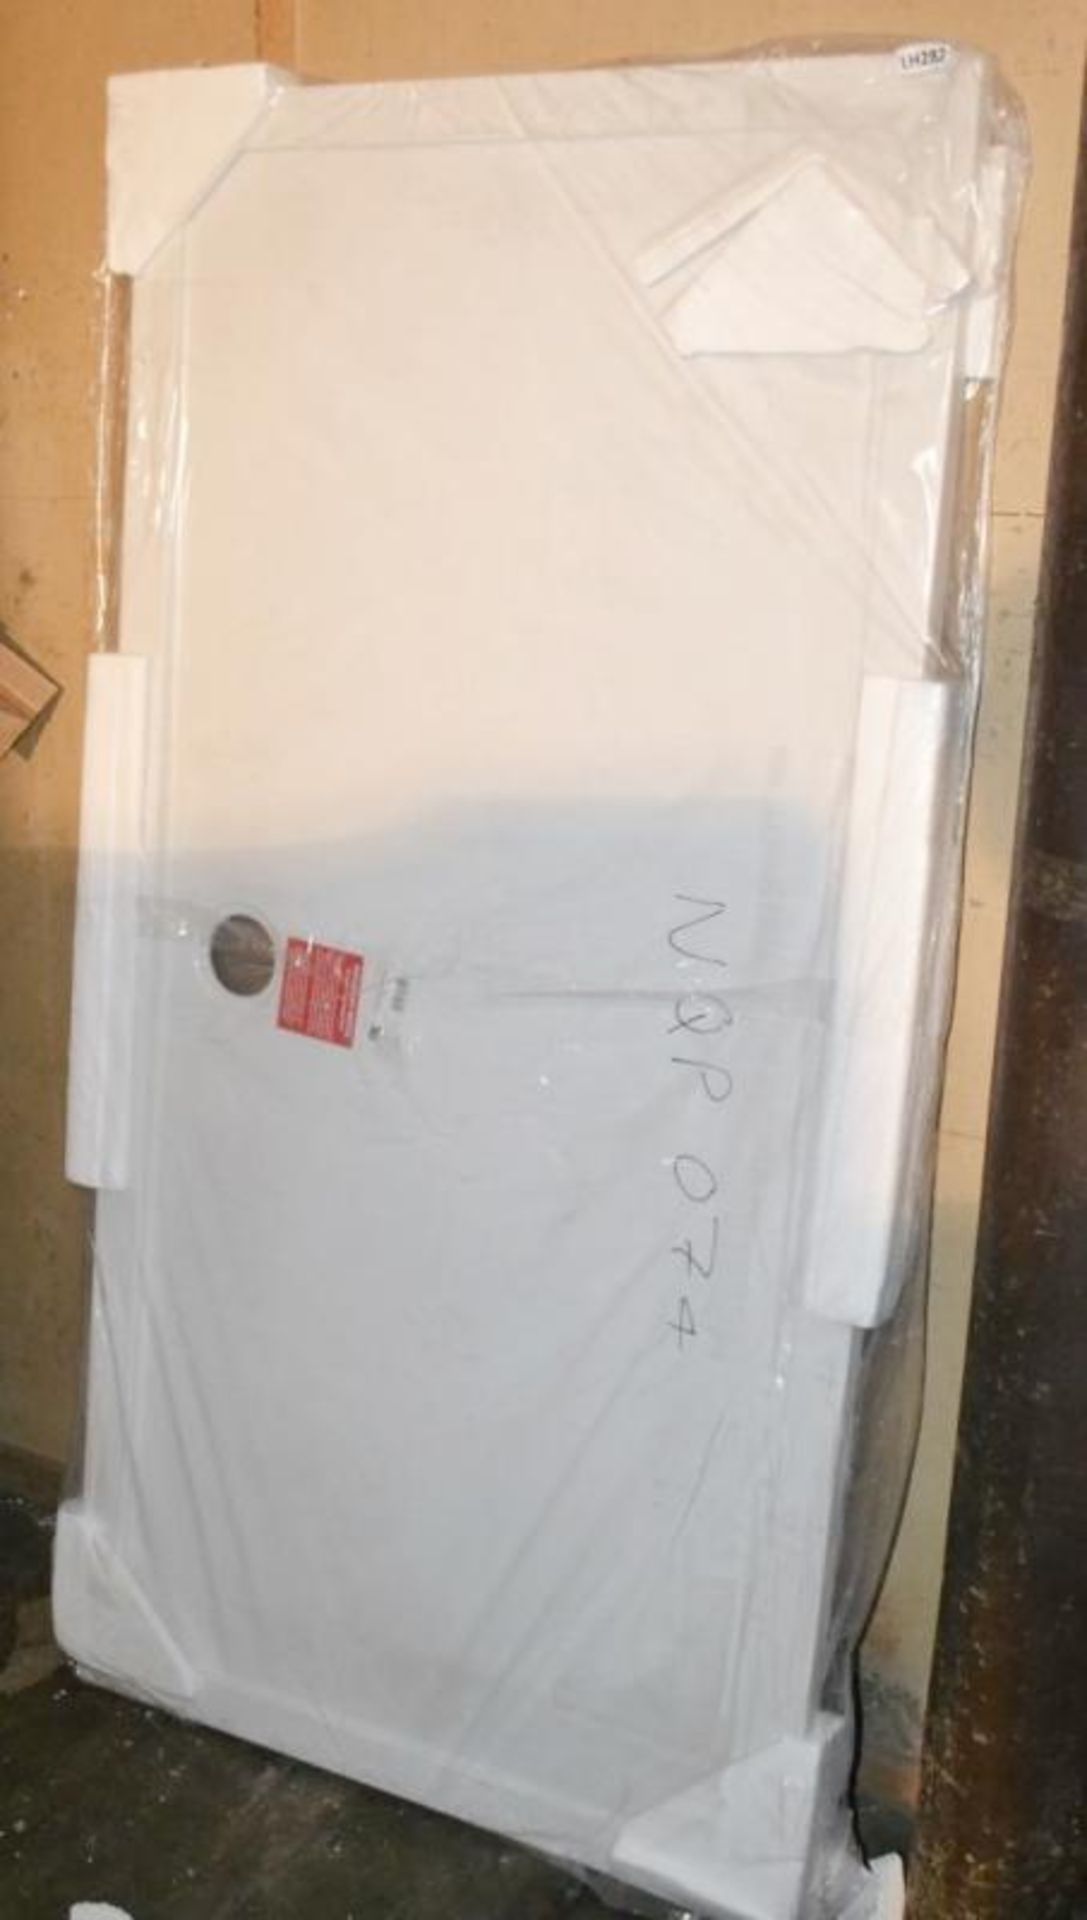 1 x Orchard Rectangular Slimline Stone Shower Tray (TR74) - New / Unused Stock - Dimensions: 1800 x - Image 3 of 5